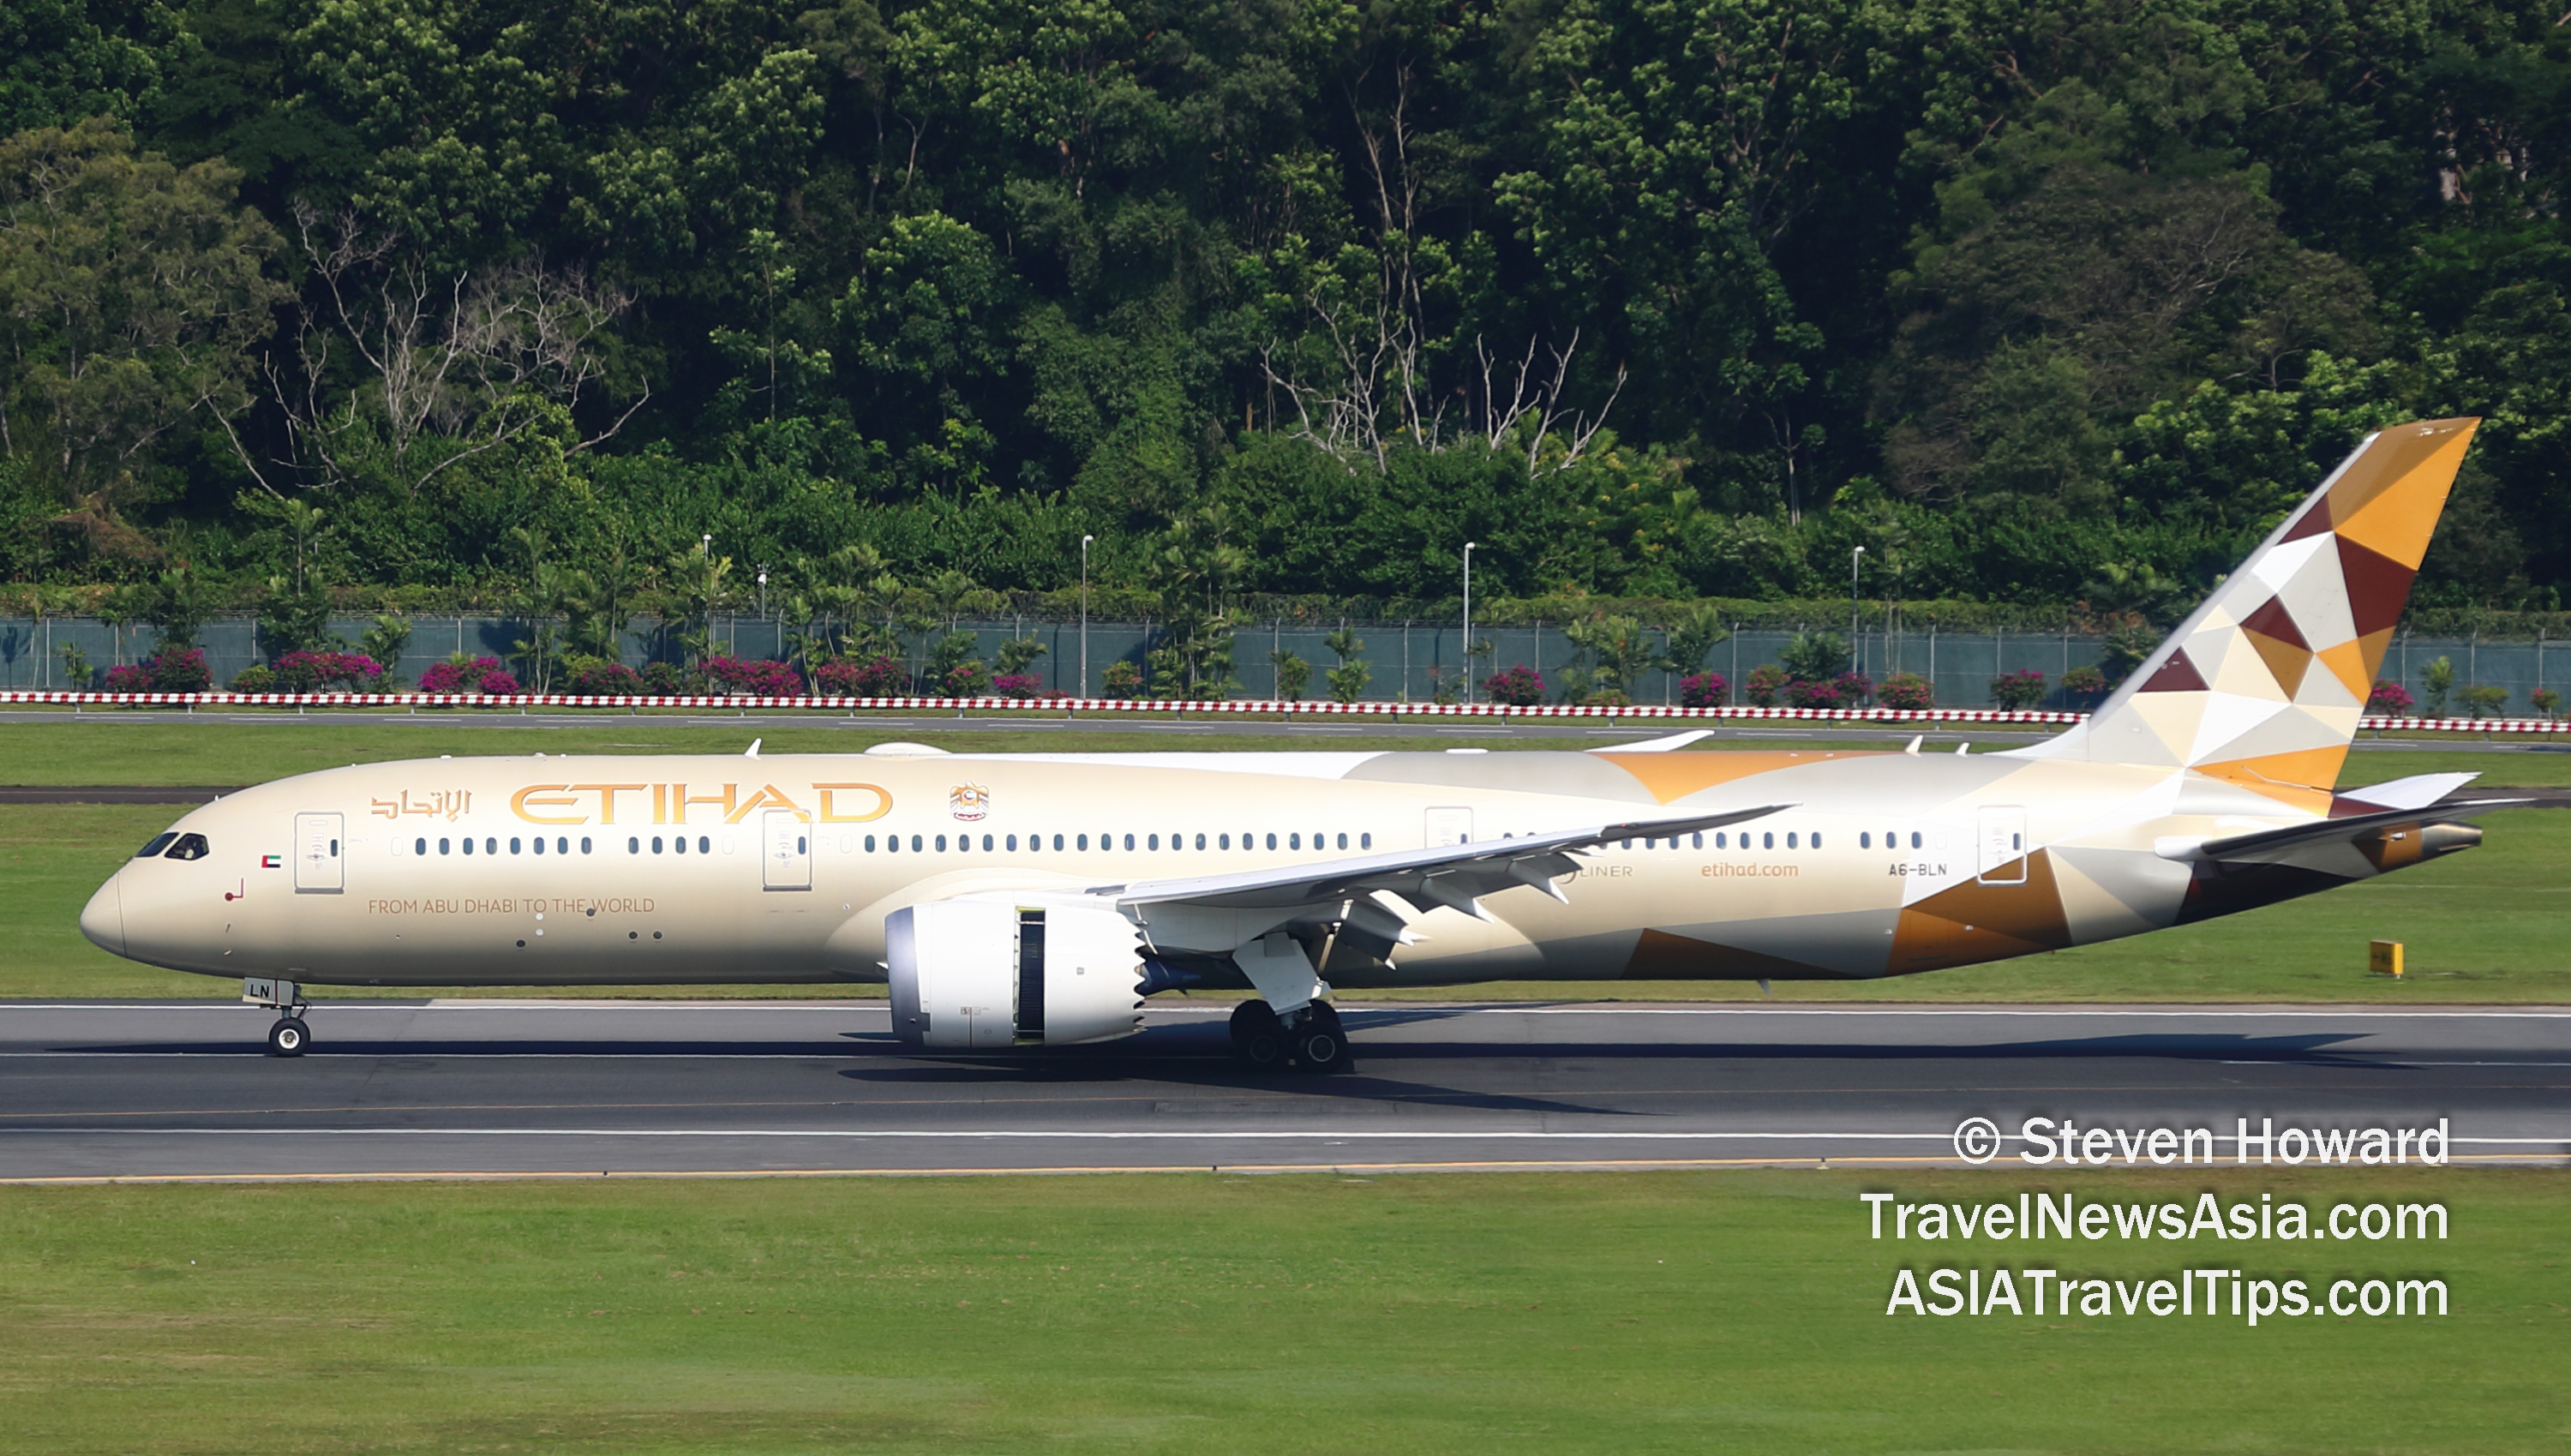 Etihad Airways Boeing 787-9 reg: A6-BLN. Picture by Steven Howard of TravelNewsAsia.com Click to enlarge.